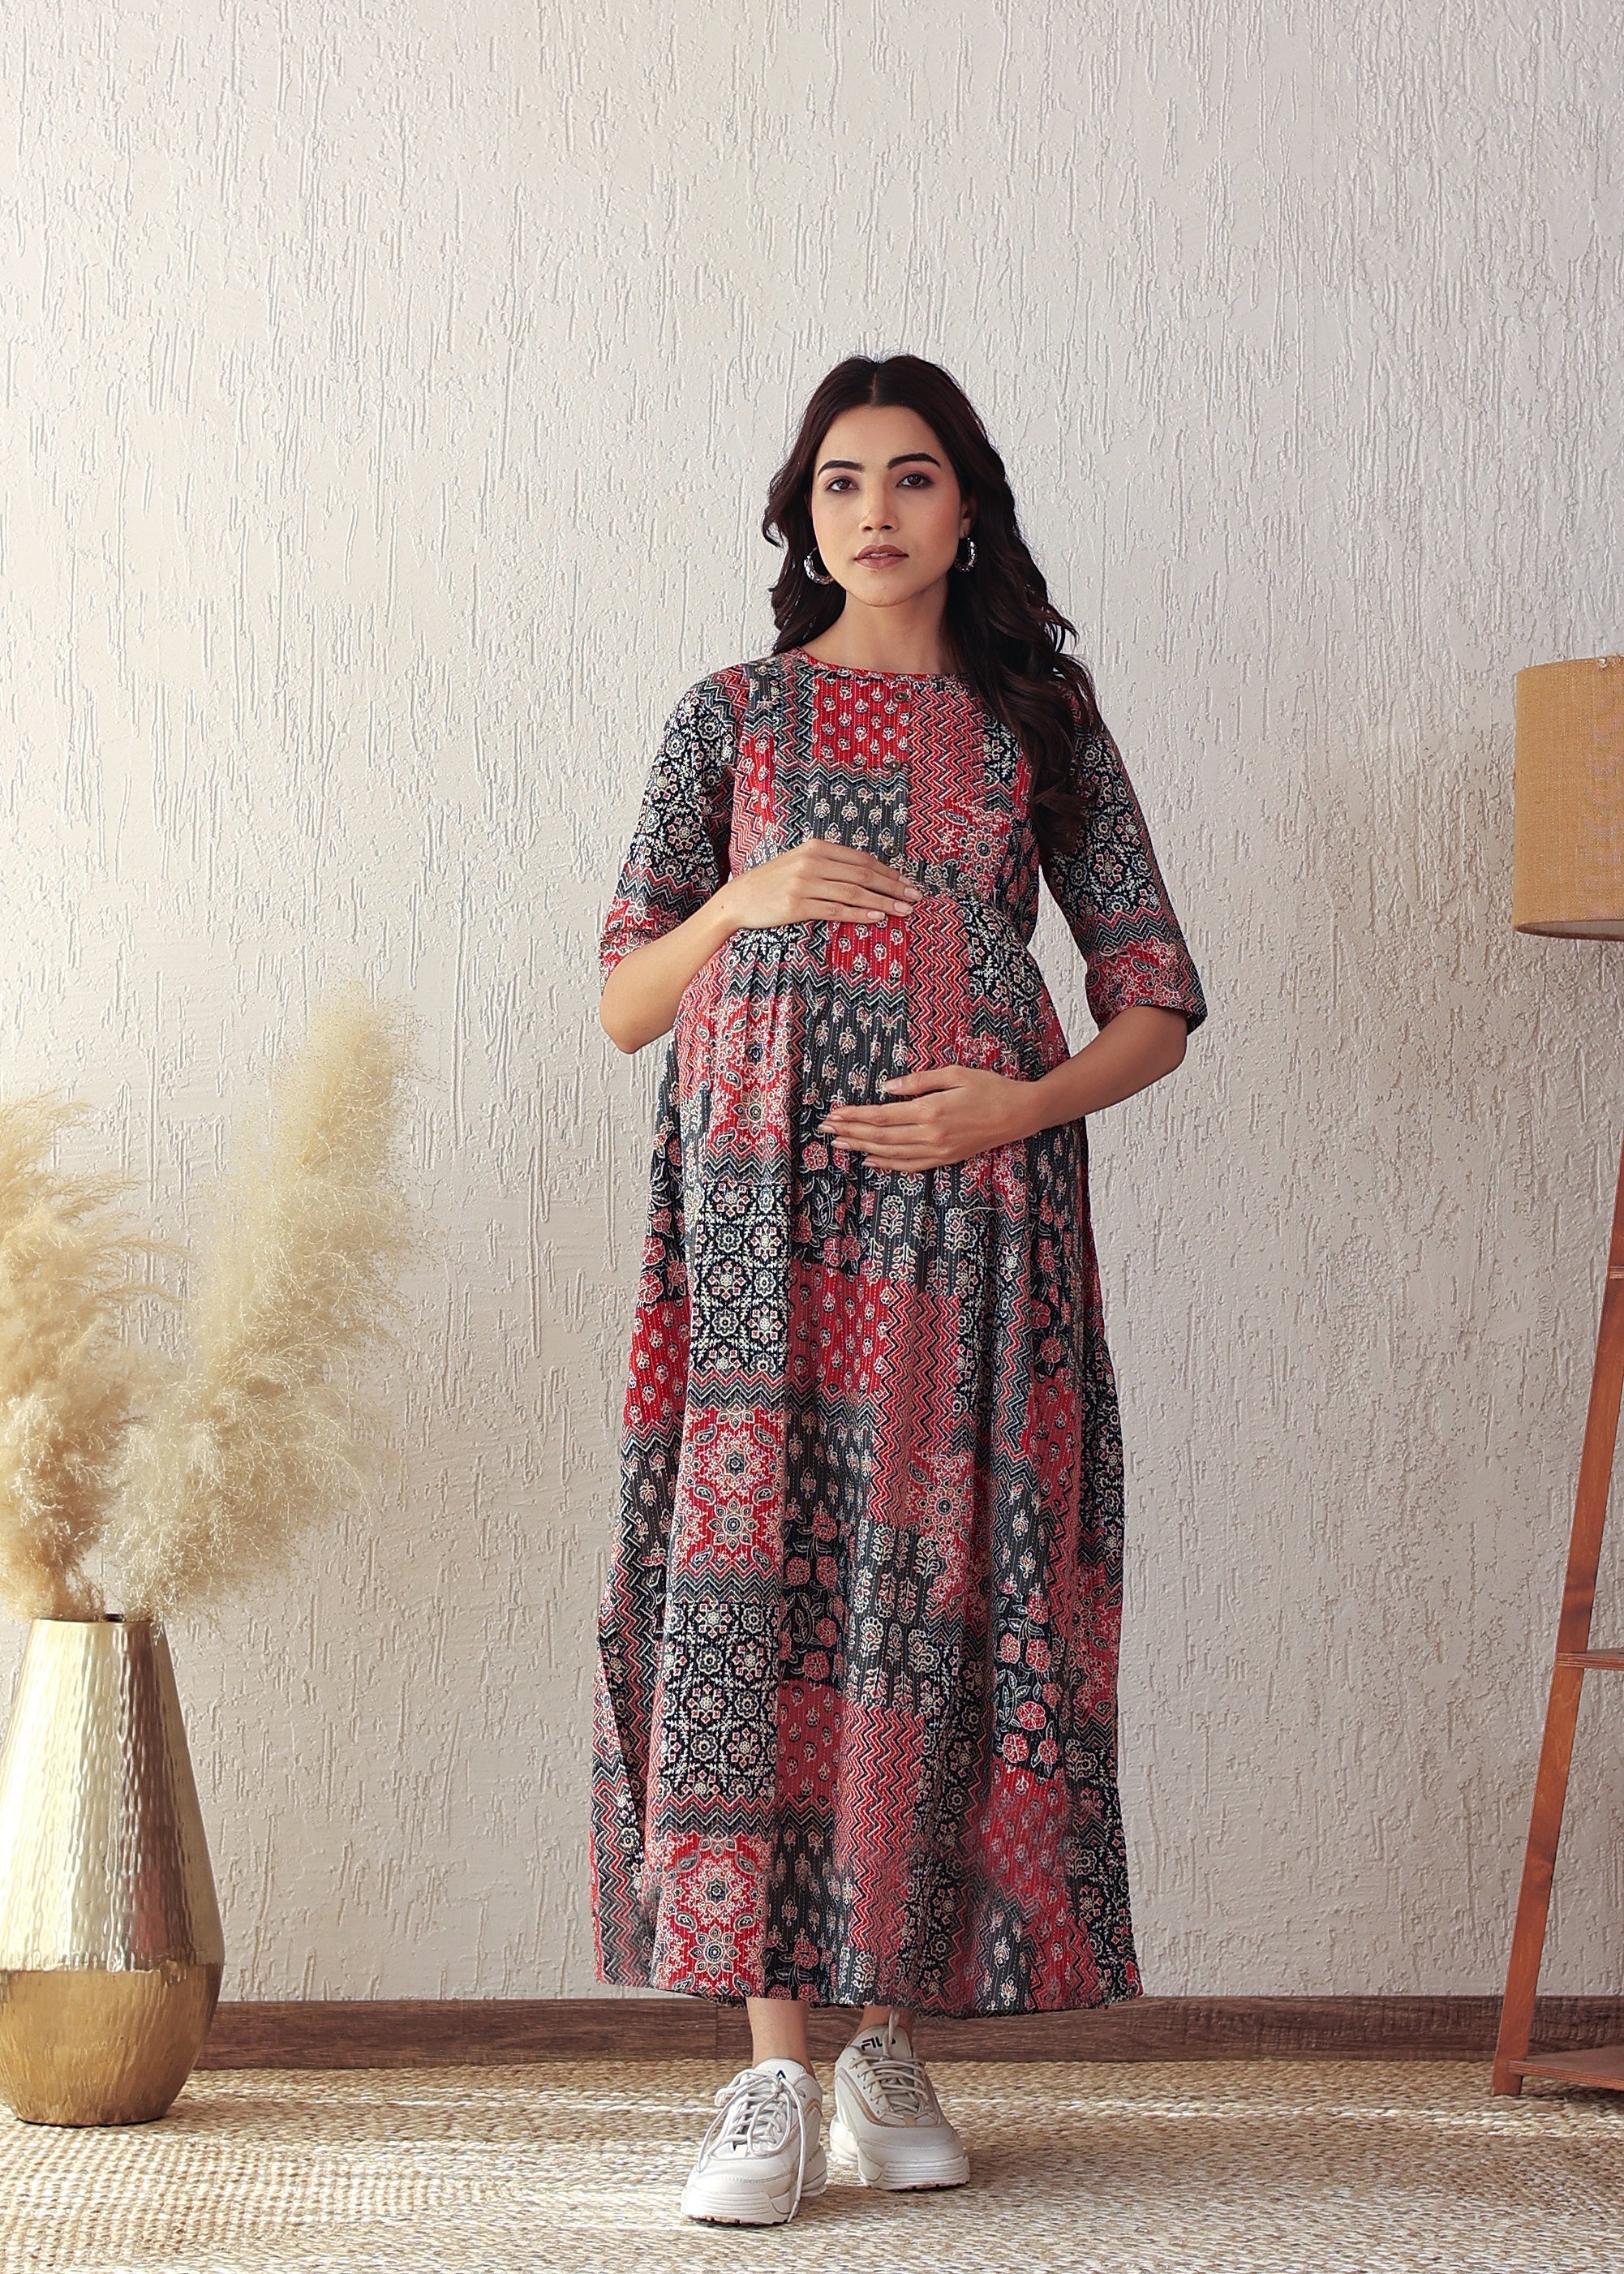 Plus size Black and Red Cotton Kantha Printed Nursing Gown